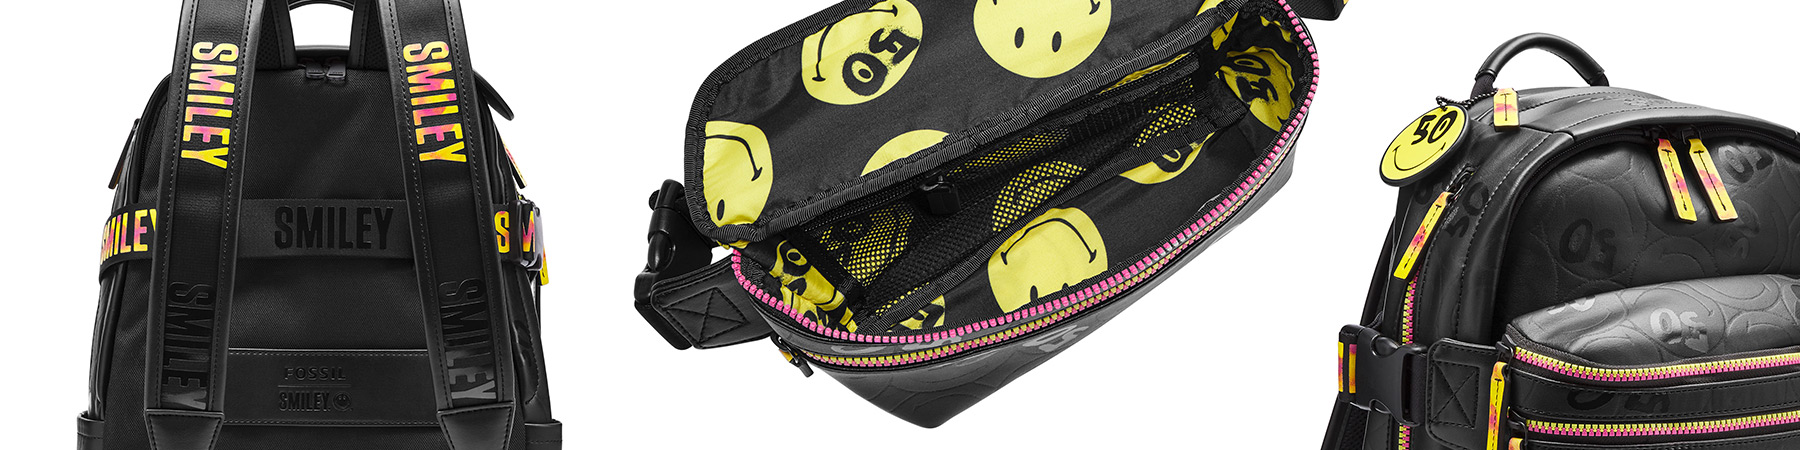 Fossil x Smiley 50th anniversary backpack